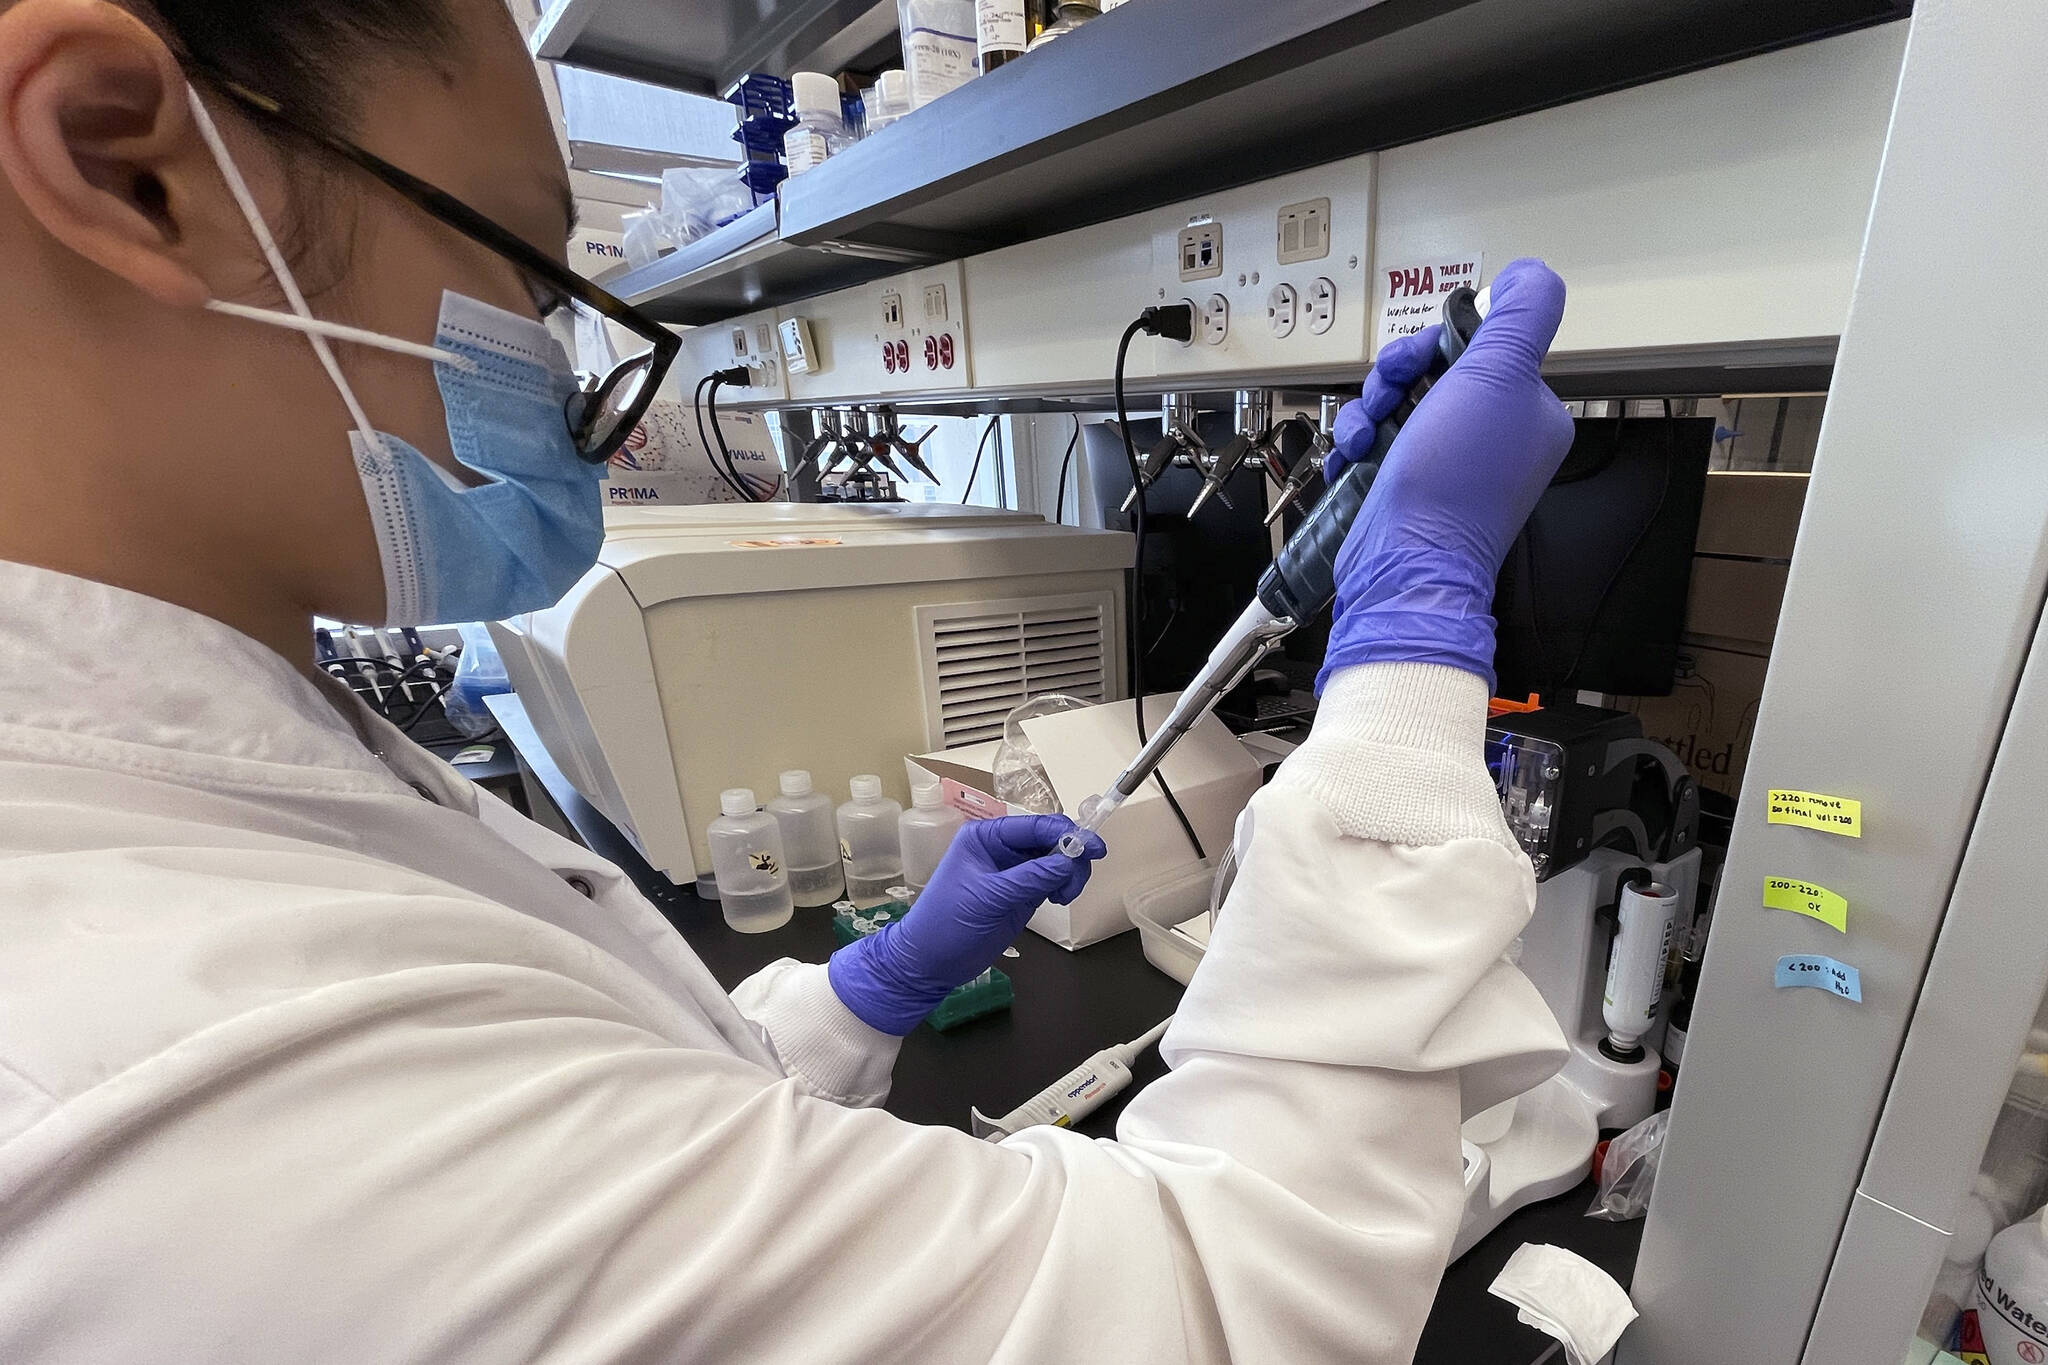 Emily Lu, a student in the environment science graduate program at Ohio State, tries to extract ribonucleic acid (RNA) from wastewater samples to test for fragments of the coronavirus, March 23, 2022 at a school lab in Columbus, Ohio. (AP Photo/Patrick Orsagos)